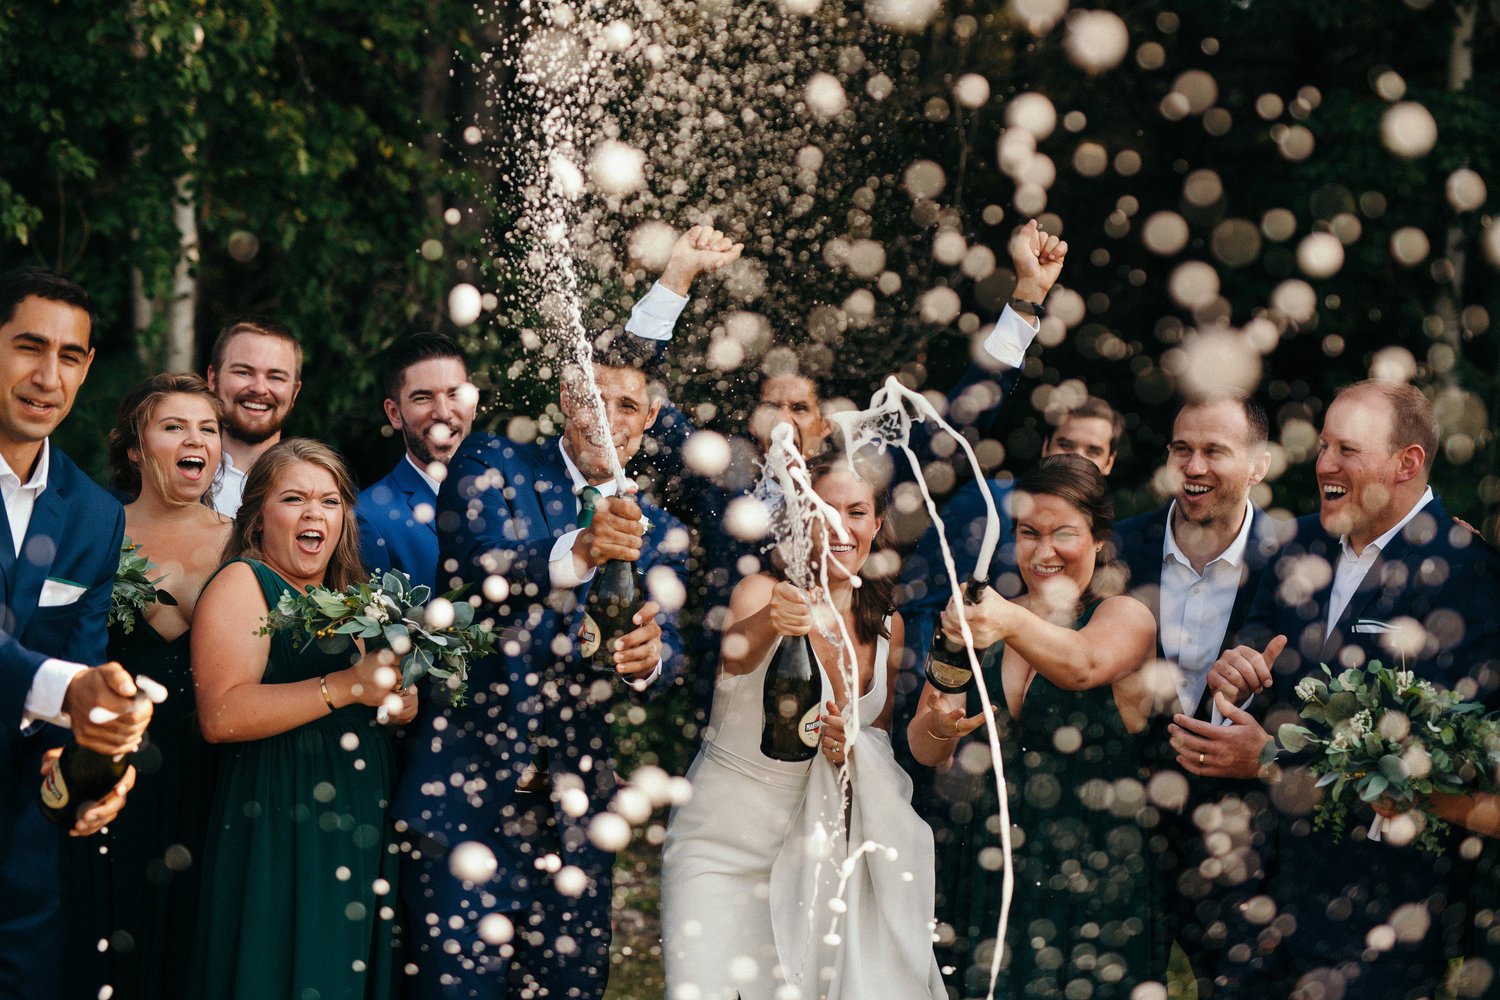 Cassie Roschs' Heart Warming Wedding Photography Will Make You Smile